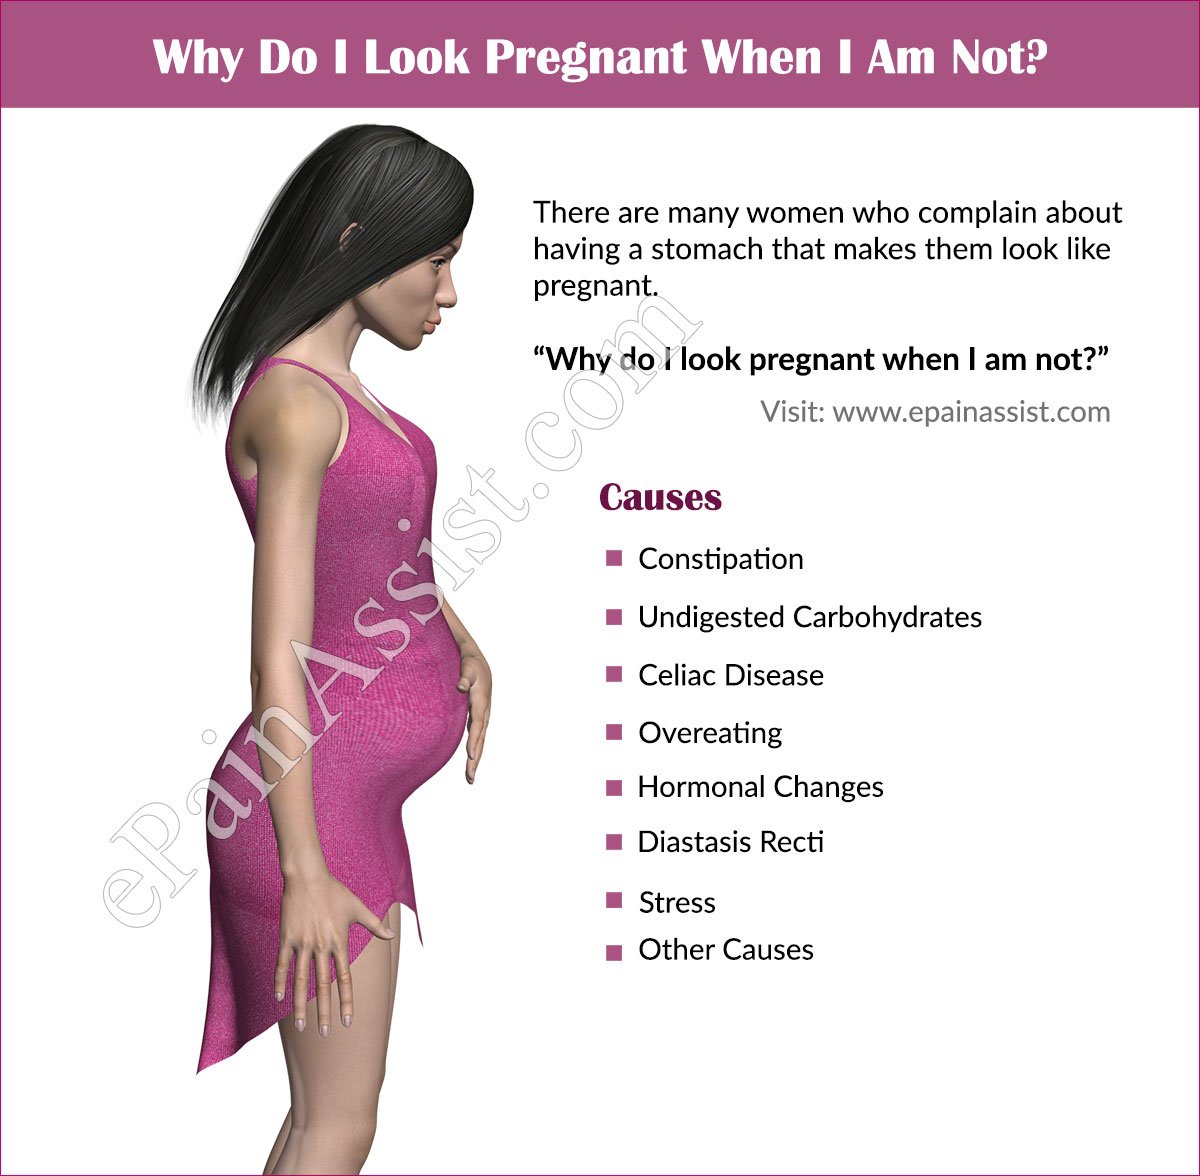 Why Do I Look Pregnant When I Am Not &  Its Solutions?